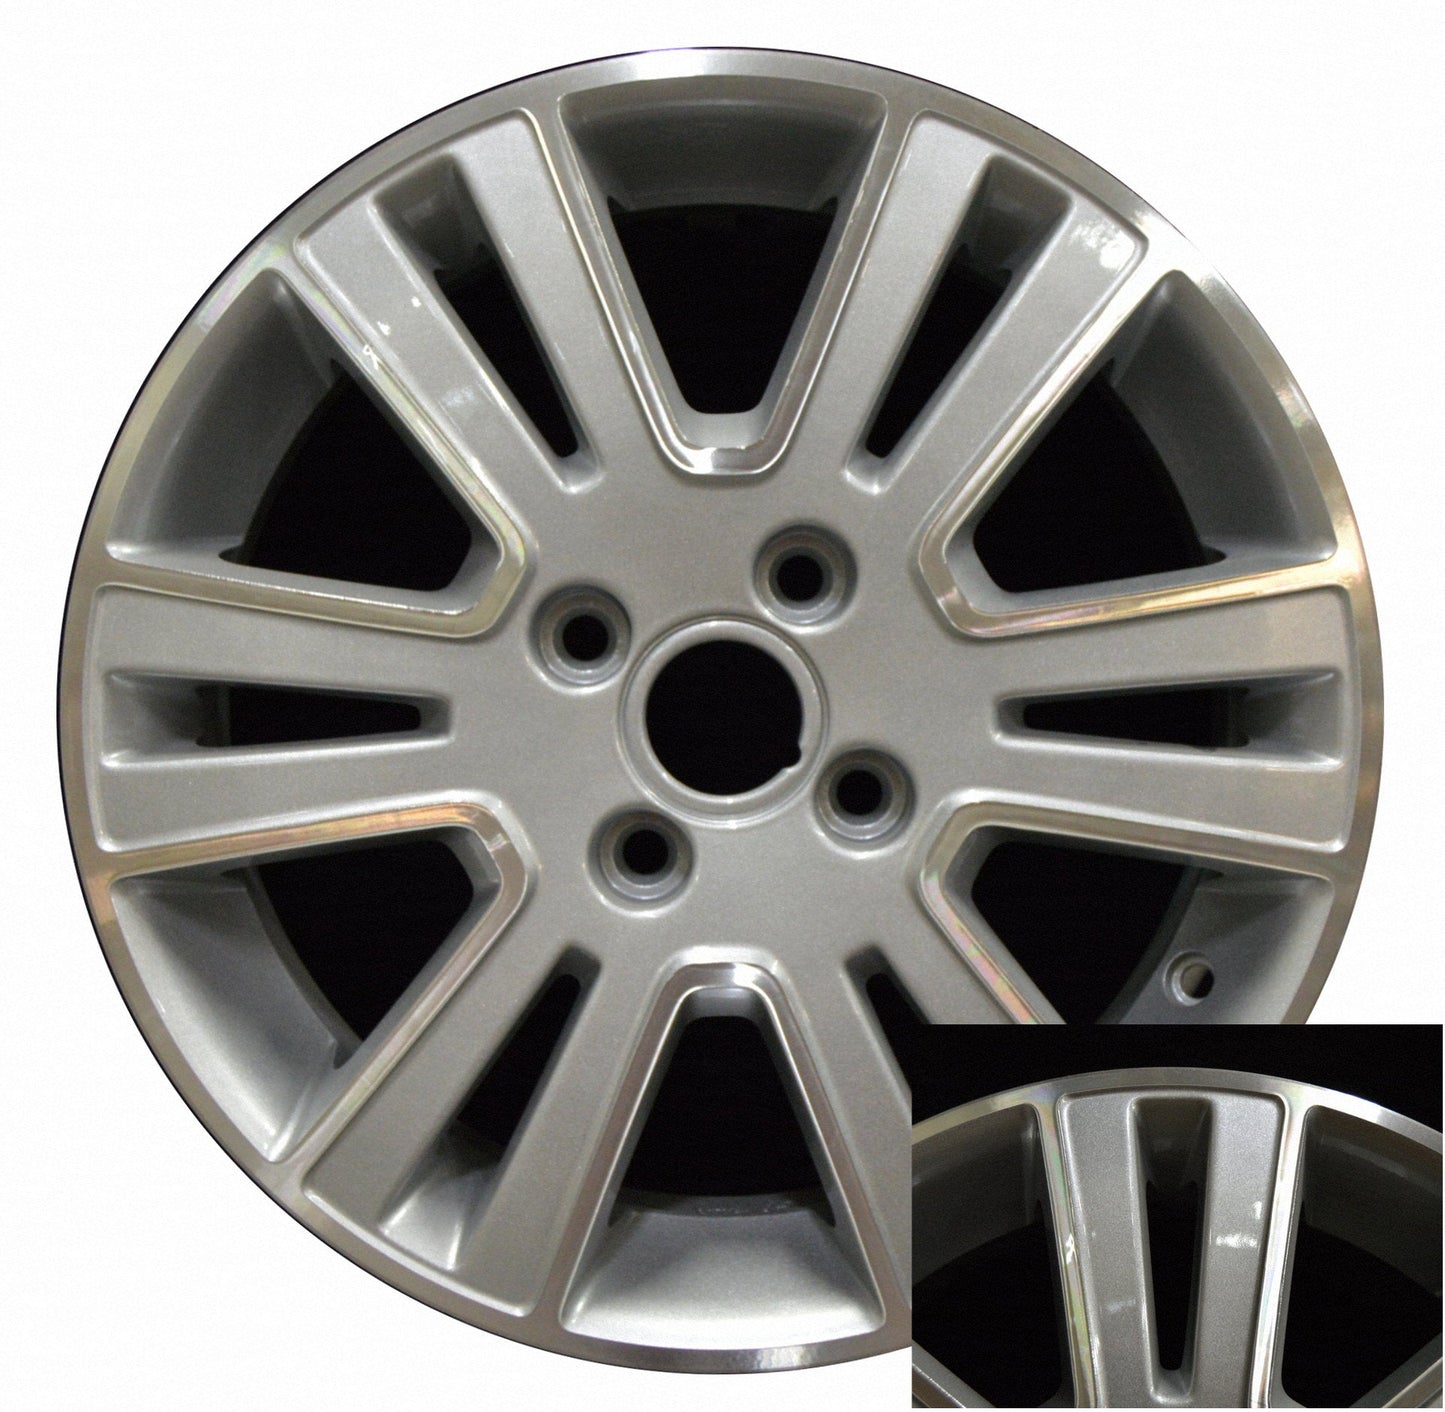 Ford Focus  2008, 2009, 2010, 2011 Factory OEM Car Wheel Size 16x6 Alloy WAO.3703B.PS02.MA